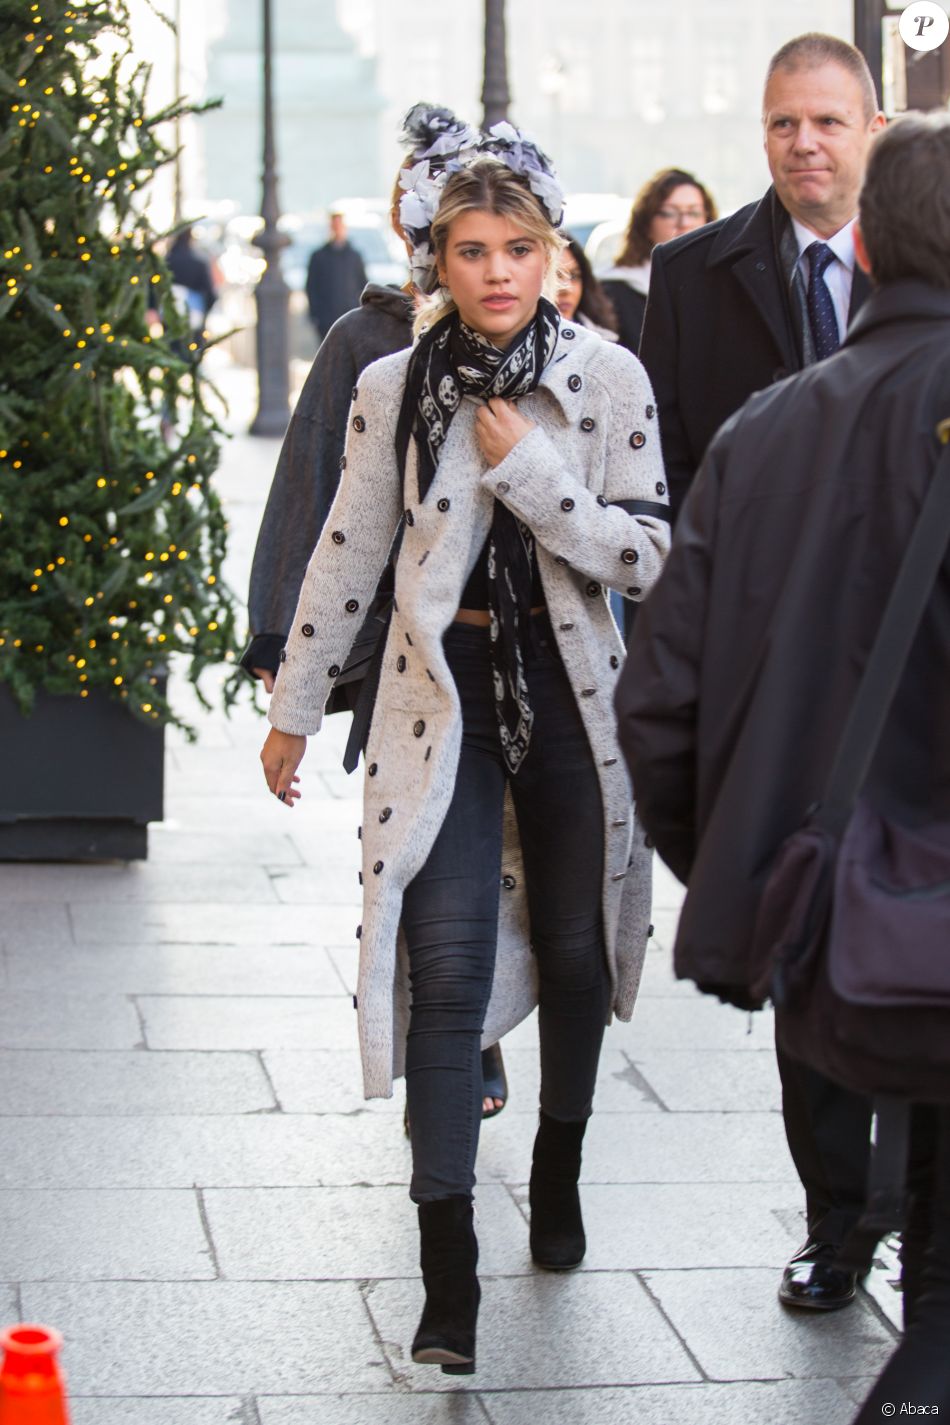 Sofia Richie leaving the Ritz hotel after Chanel fashion show in Paris, France on December 6, 2016. Photo by Nasser Berzane/ABACAPRESS.COM06/12/2016 - Paris